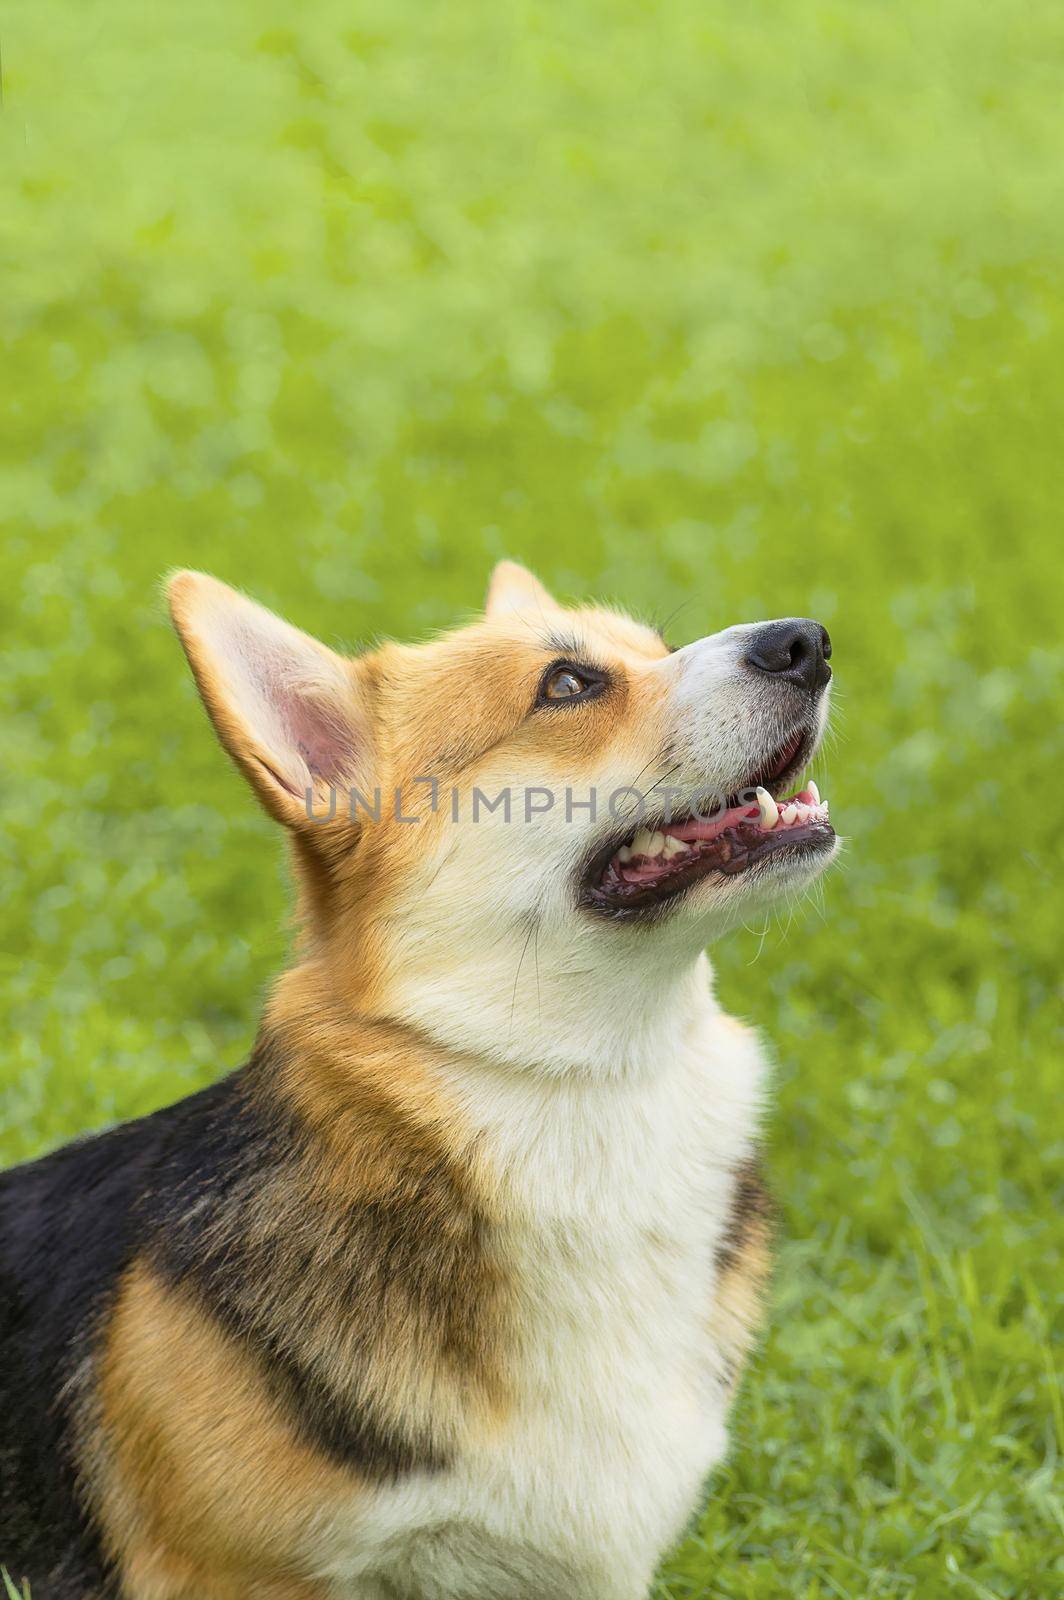 Welsh Corgi - a hunting breed of dogs. Background of green blurred grass. Concept: parodist dogs, dog friend of man, true friends, rescuers. Space under the text. 2018 year of the dog in the eastern calendar